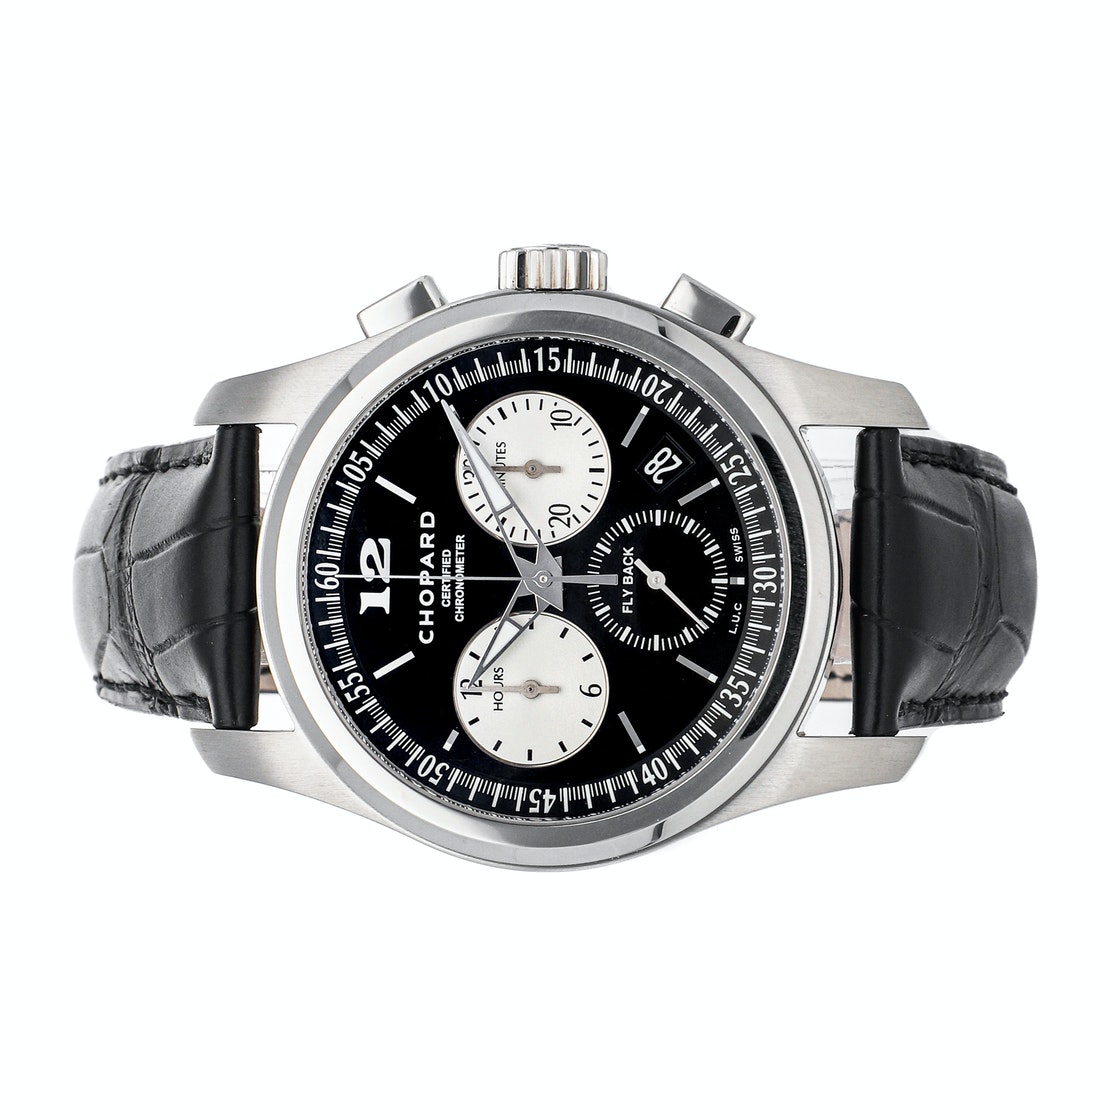 

Chopard Black Stainless Steel L.U.C. Chrono One Limited Edition